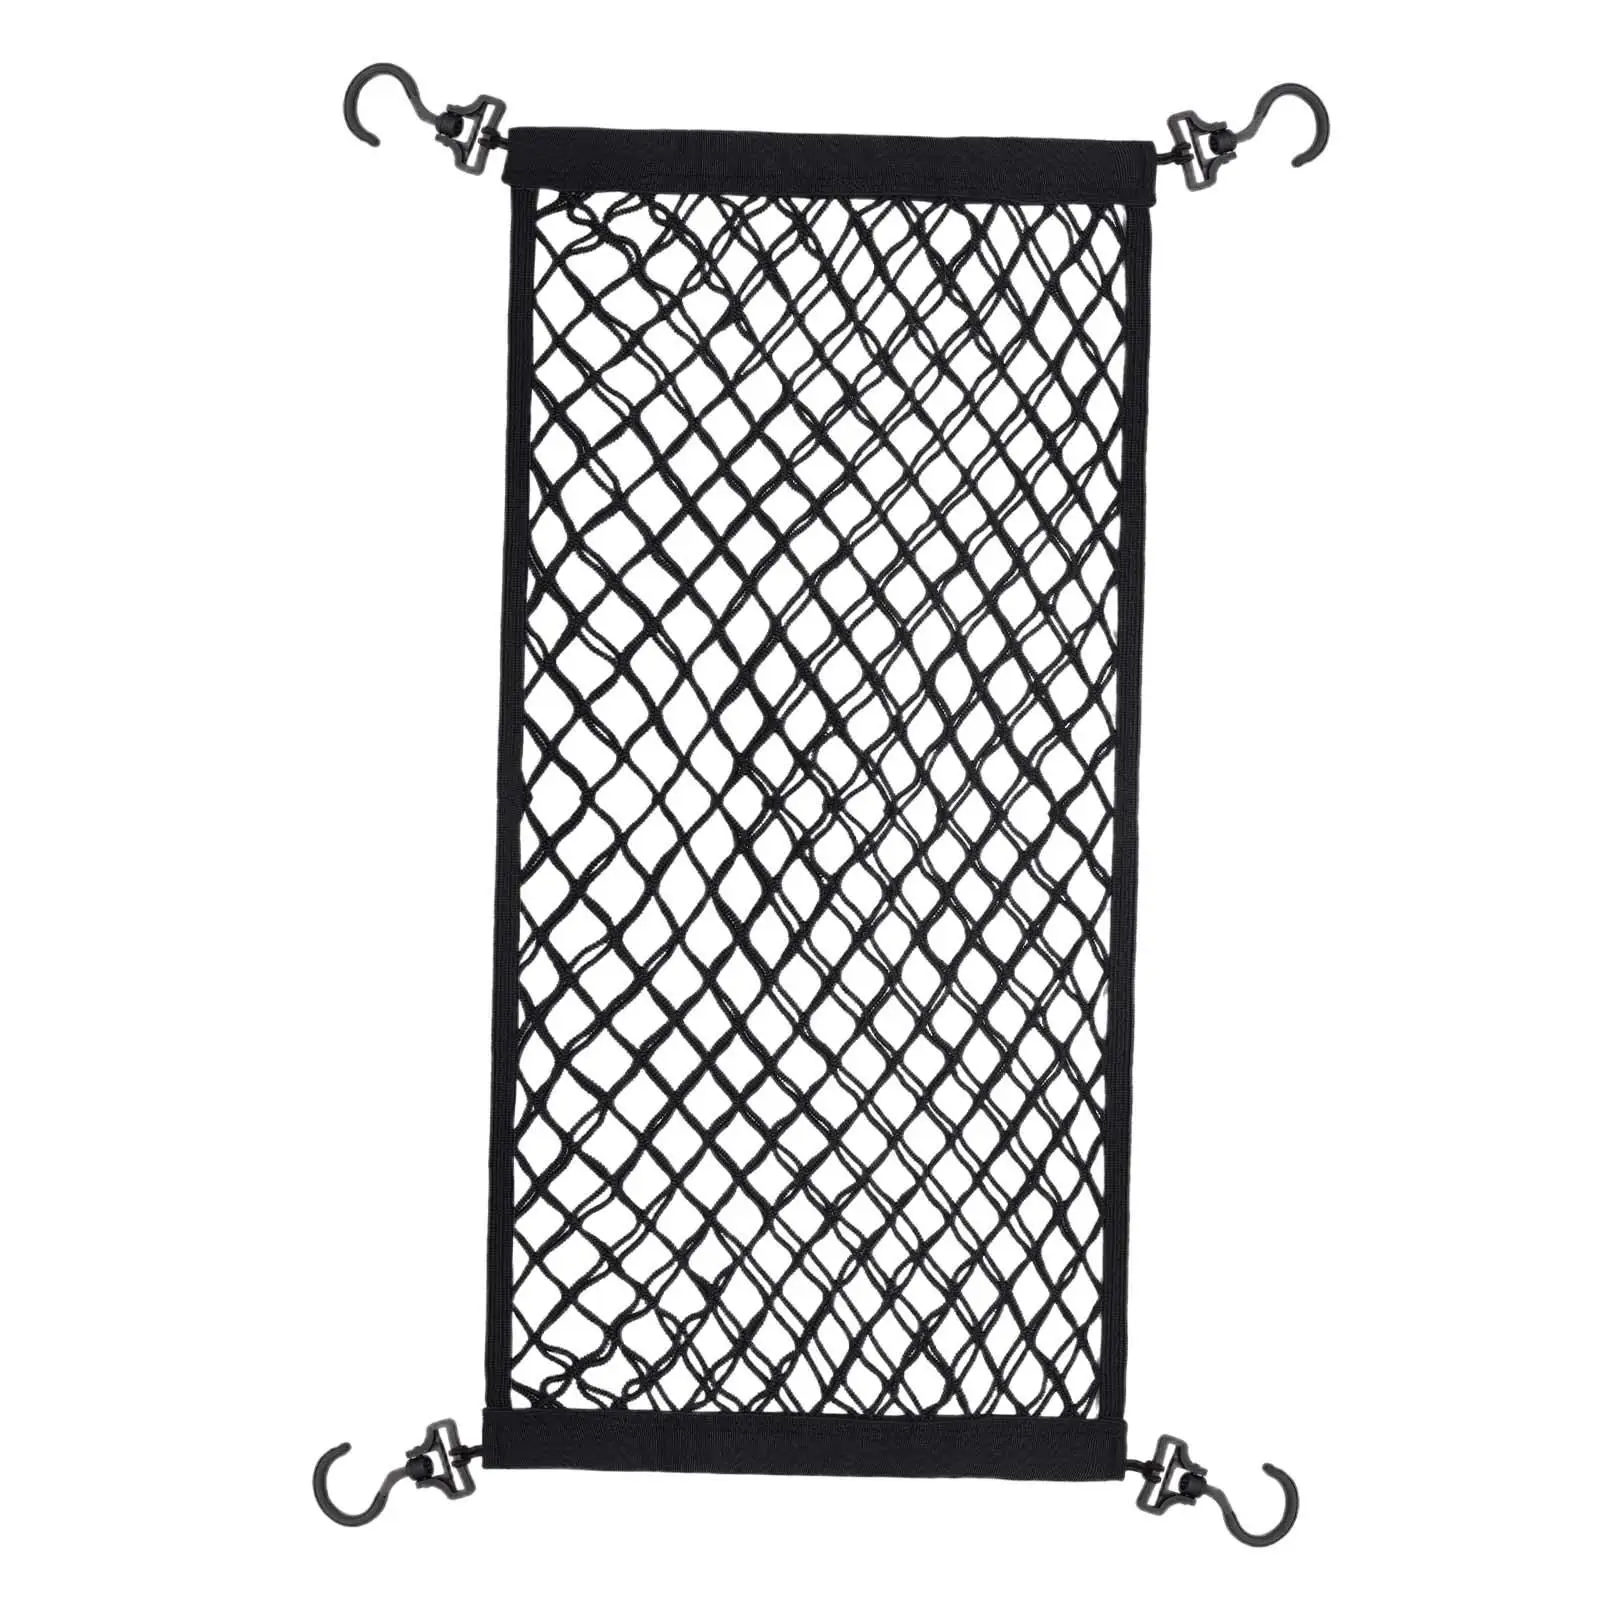 Car Ceiling Cargo Net Pocket Storage Mesh Netting with Hooks Mesh Pouch Camping Cargo Net for Garden Cart Road Trip Beach Carts